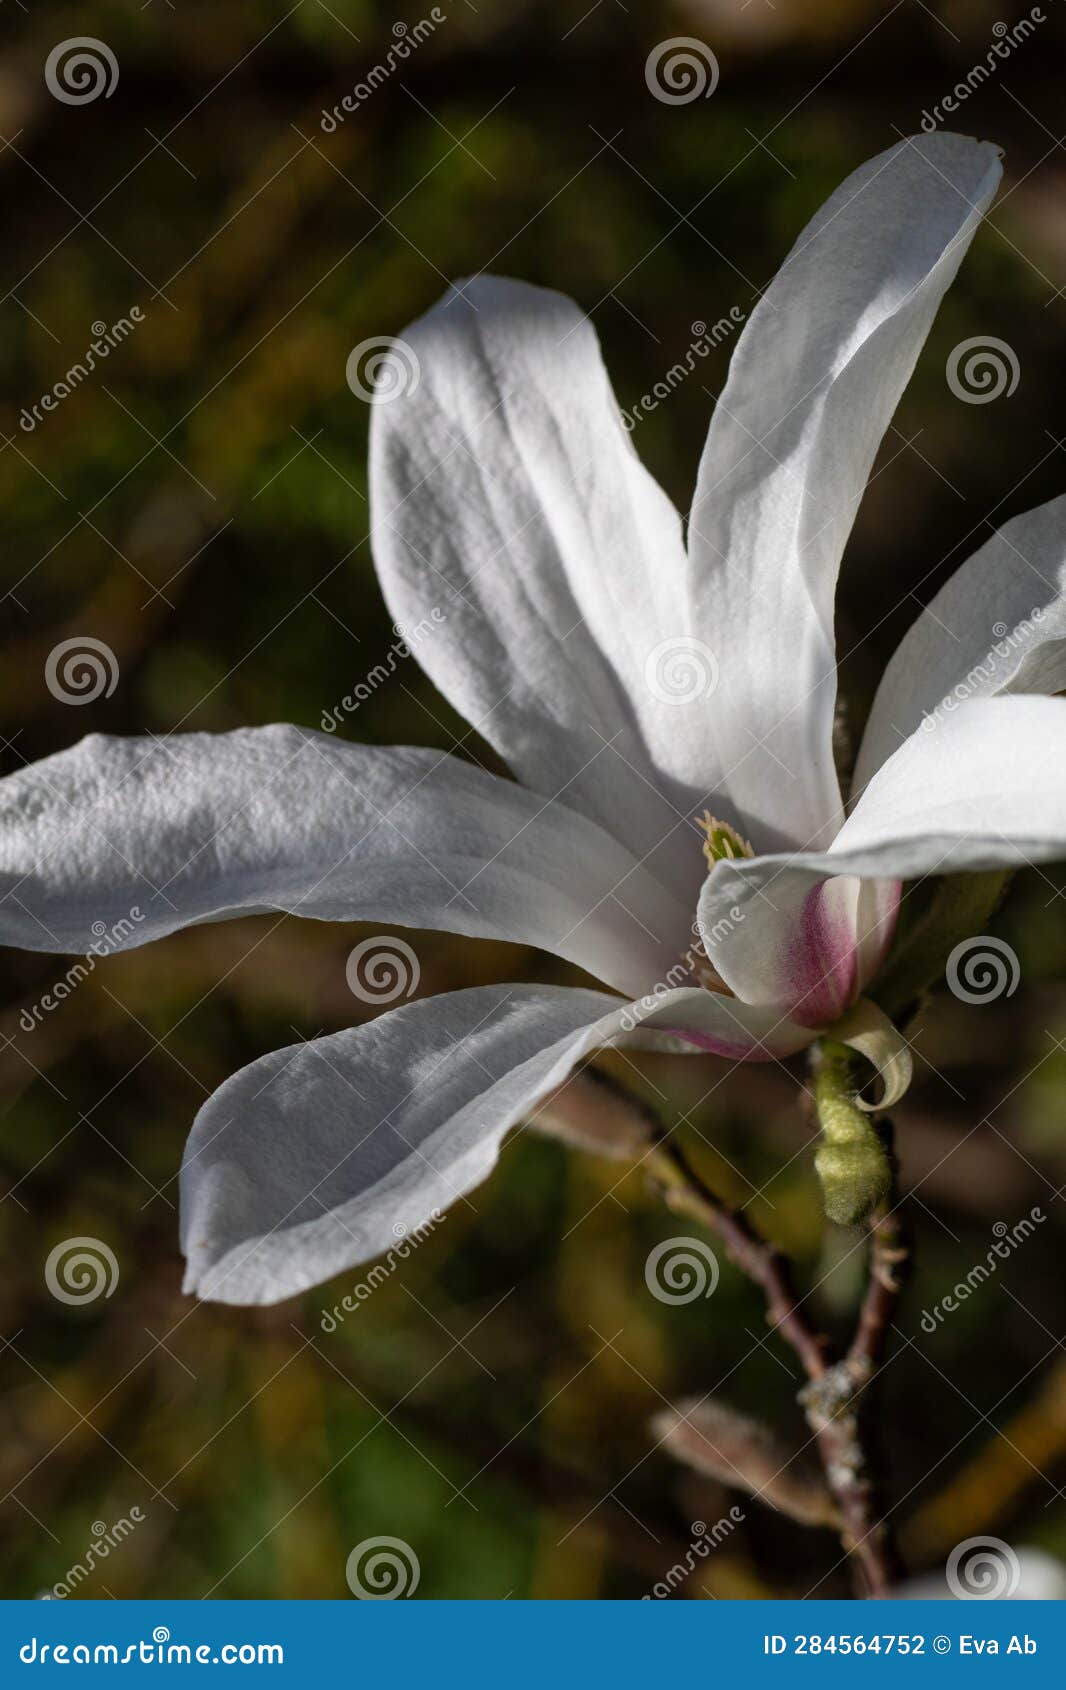 white magnolia flower in penumbra and green mottled background. vertical photo